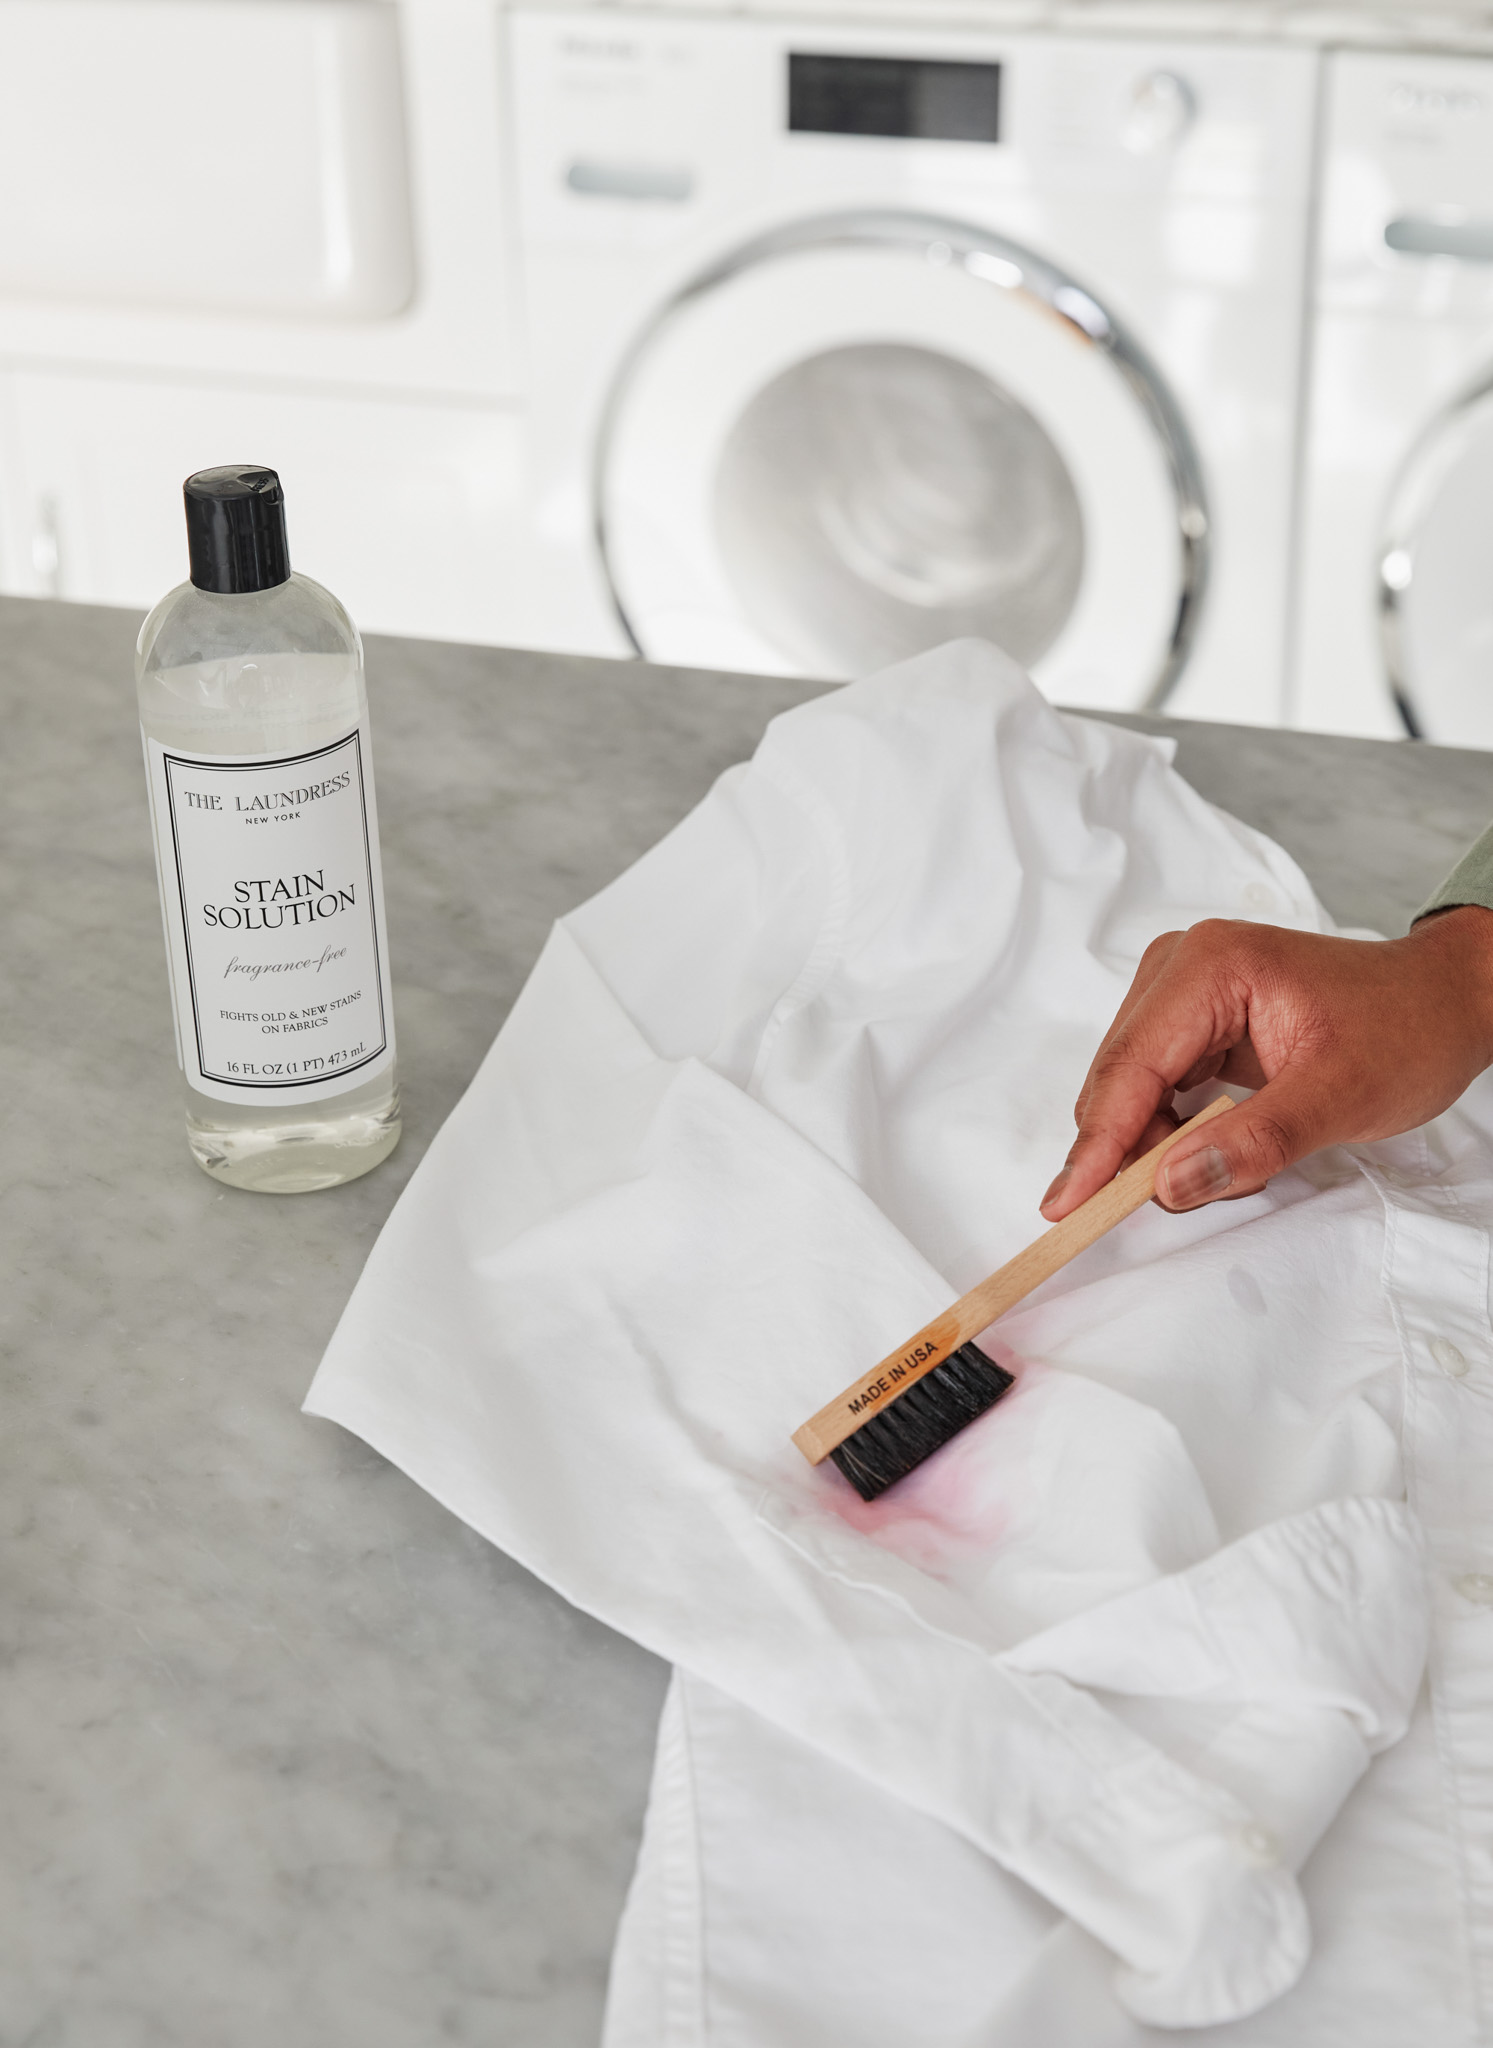 removing ink stain from white shirt with stain brush and the laundress stain solution